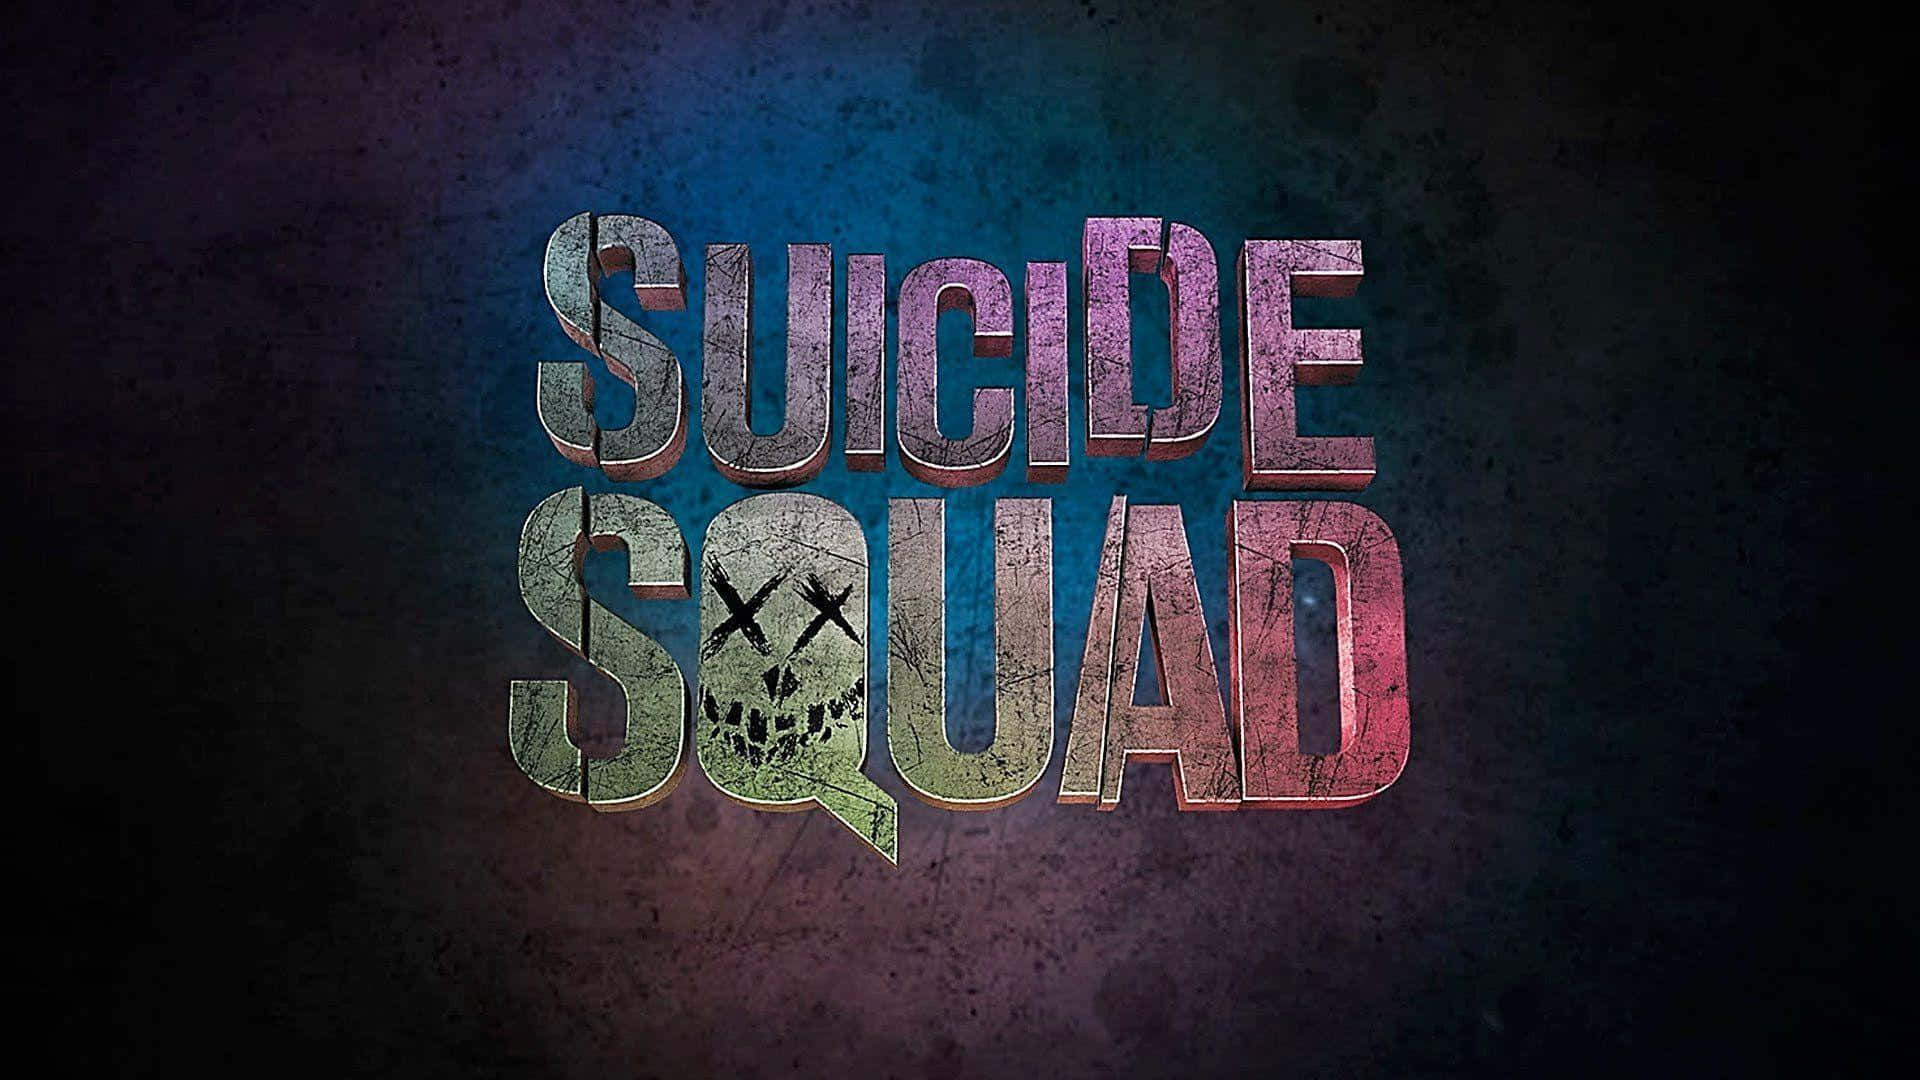 Get Ready for DC's Ultimate Villainous Alliance in The Suicide Squad. Wallpaper